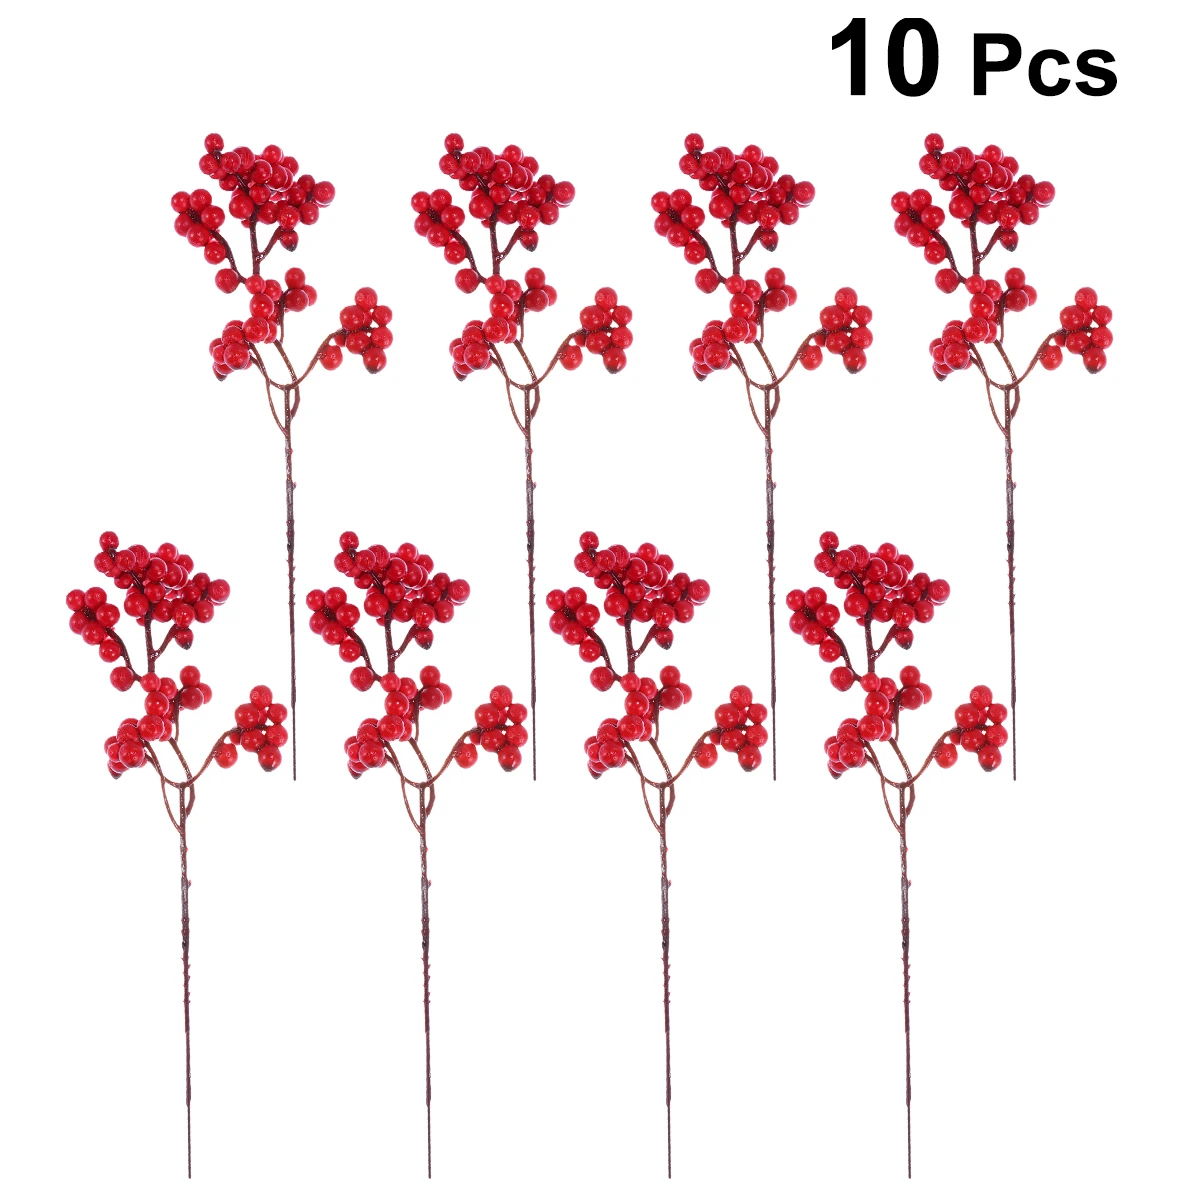 

10Ppcs Simulation Red Berries Bouquet Artificial Berry Branches Cherry Stamen For Home Xmas New Year Gift Wedding Flower Wreath